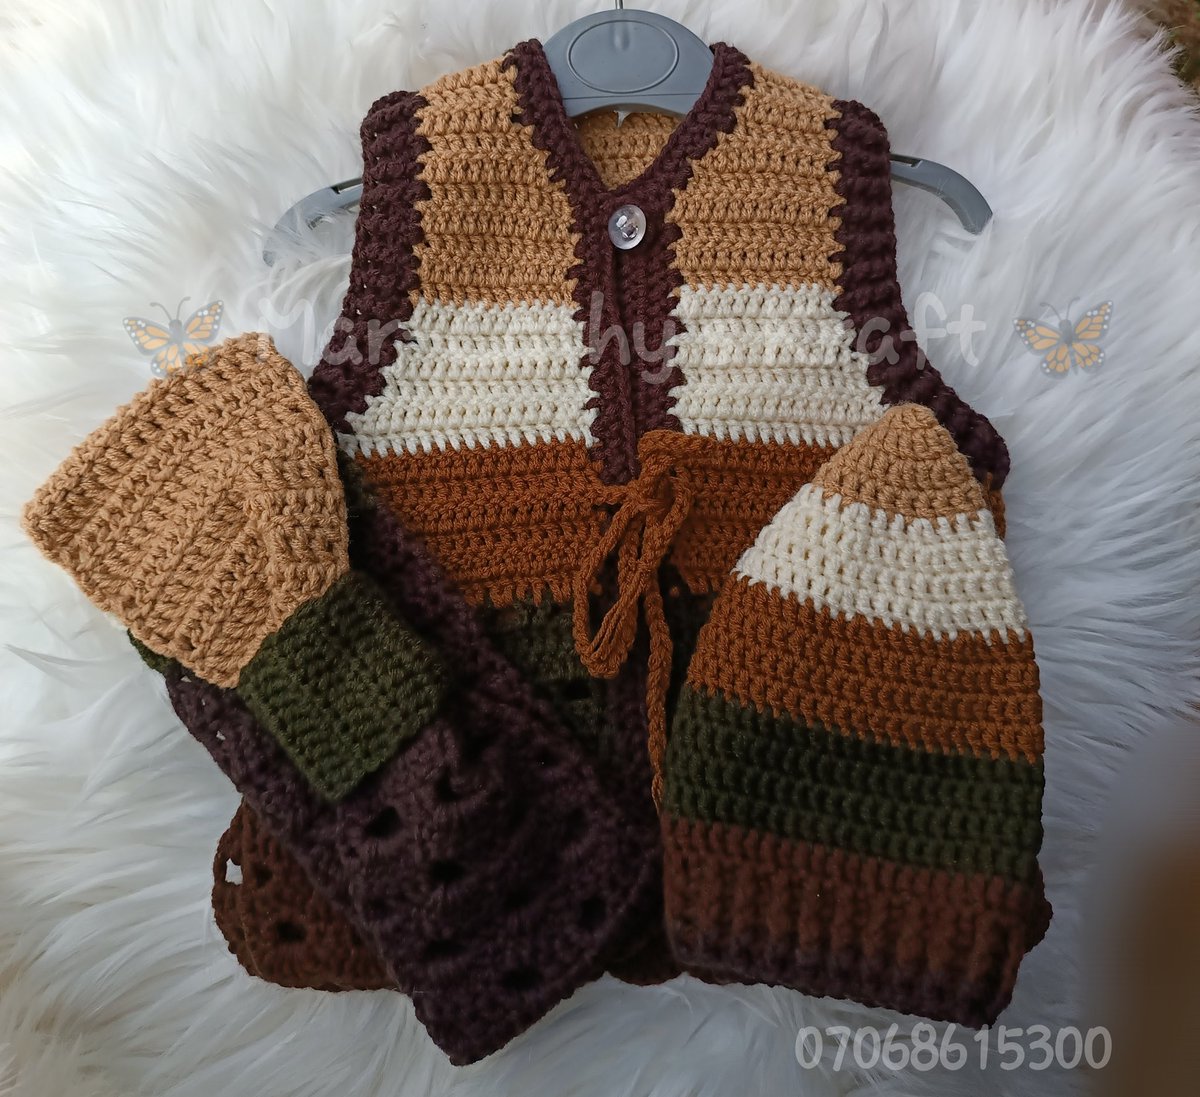 oh!!! The uniqueness of #handmade 
~ #crochet_baby_gift🤩😍
✓3 in 1 set
✓Available in all sizes
.
.
.
#cardigan #sleeveless_sweater #sweatervest #sleeveless_crochet_cardigan #sleeveless_crochet_jacket #crocheted #warmer #crochet #crochetdesigns #crochetsweater #crochet_cardigan